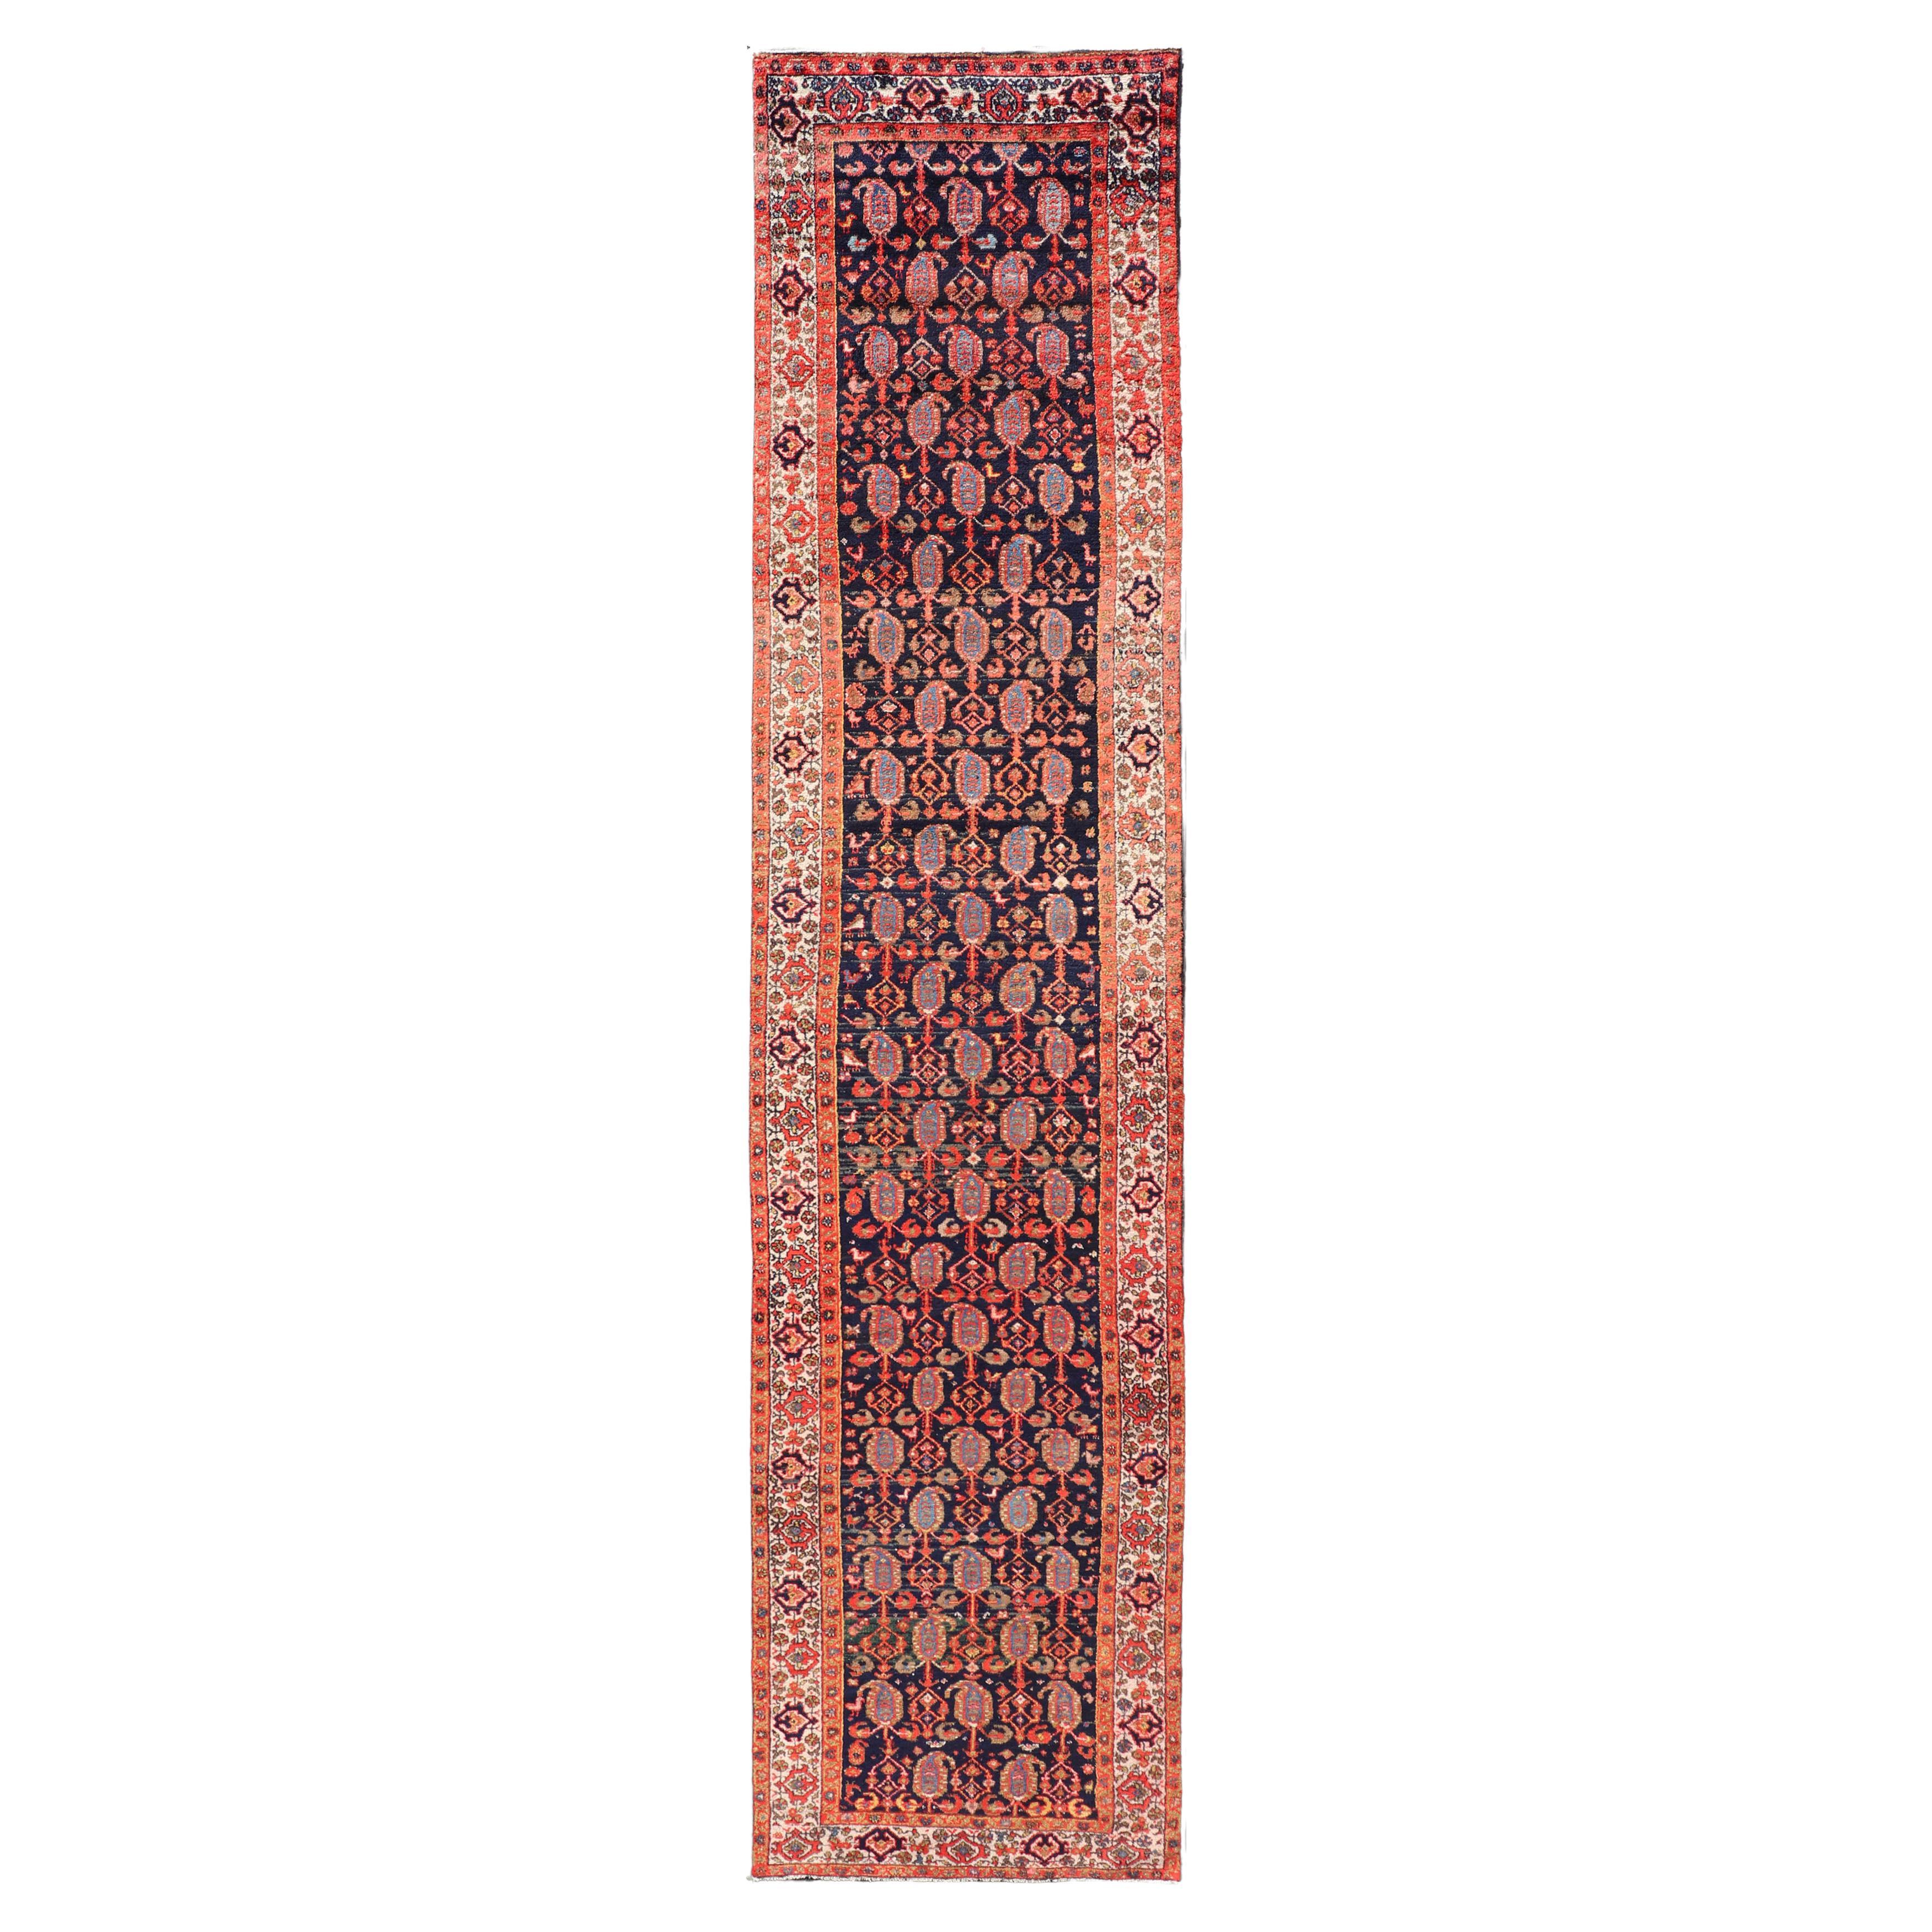 Long Antique Persian Hamadan Runner with All-Over Sub-Geometric Design